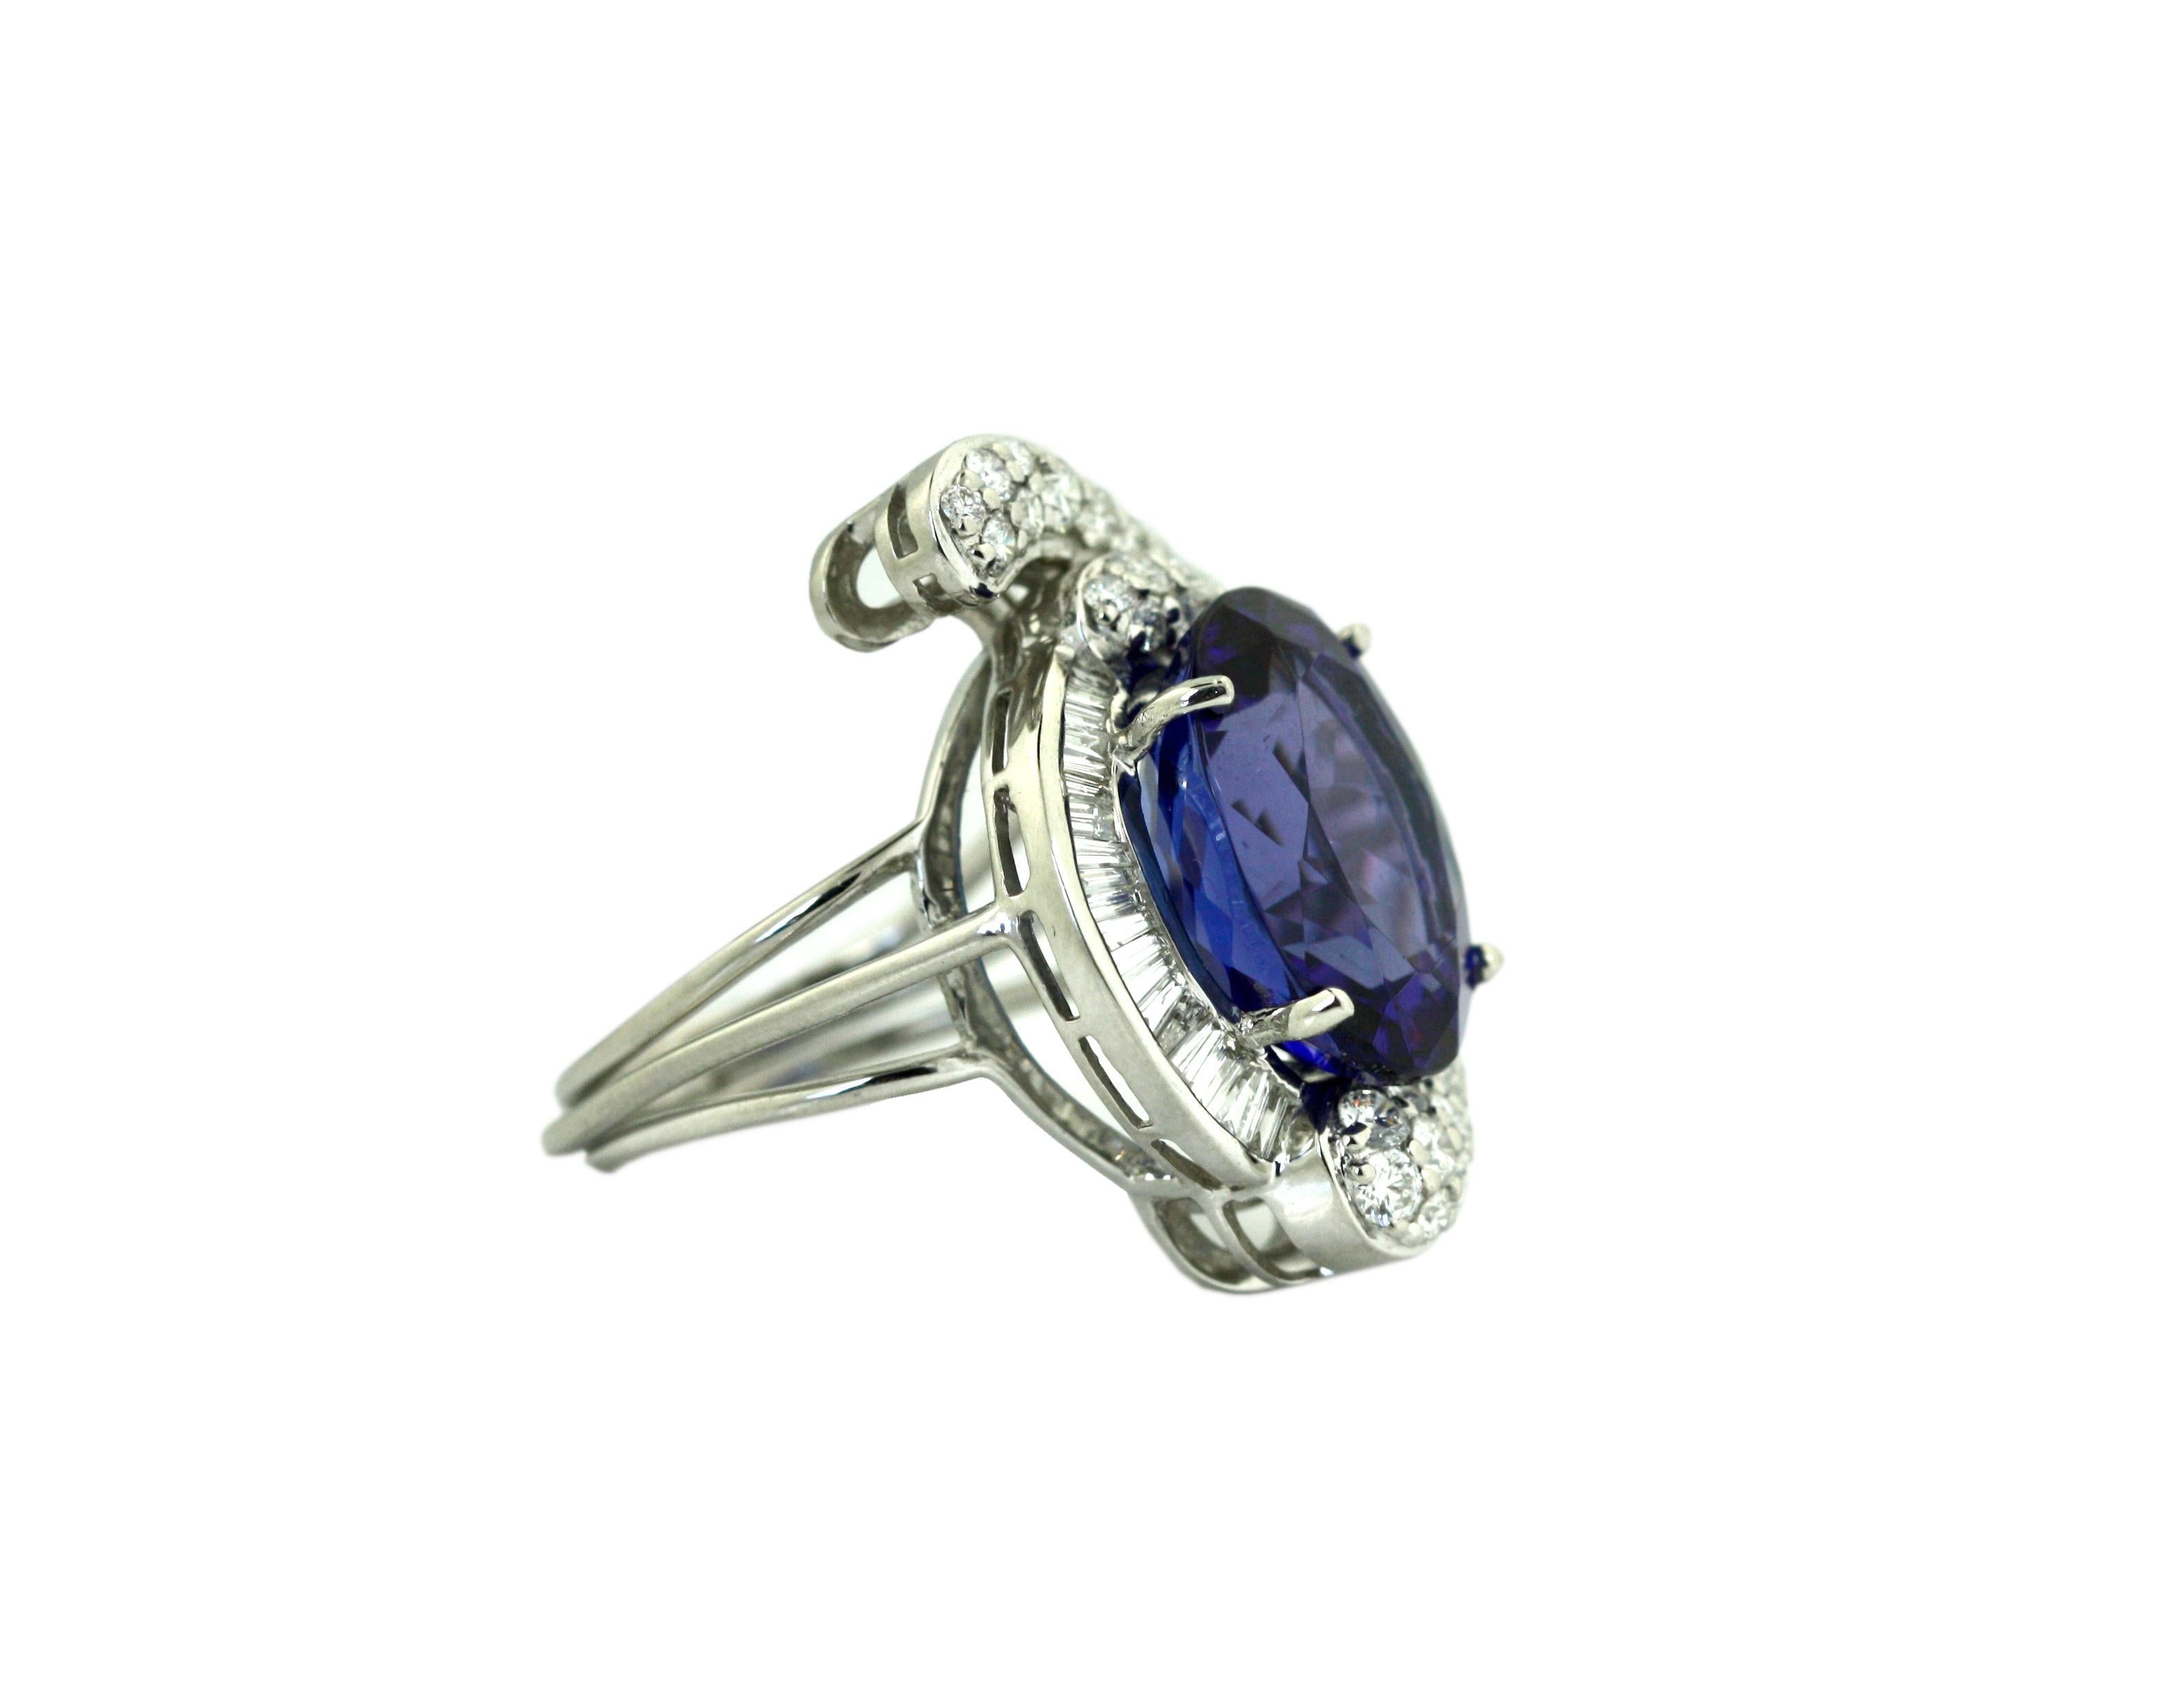 
Platinum, Tanzanite and Diamond Ring
Prong-set with a oval-shaped Tanzanite weighing 14.11 carats, framed by diamonds, size 7 3/4.
﻿Accompanied by GIA Report 5202917842 Stone measurements 16.45 x 13.54 x 9.36mmShape: Oval, Cuttin Style: Crown